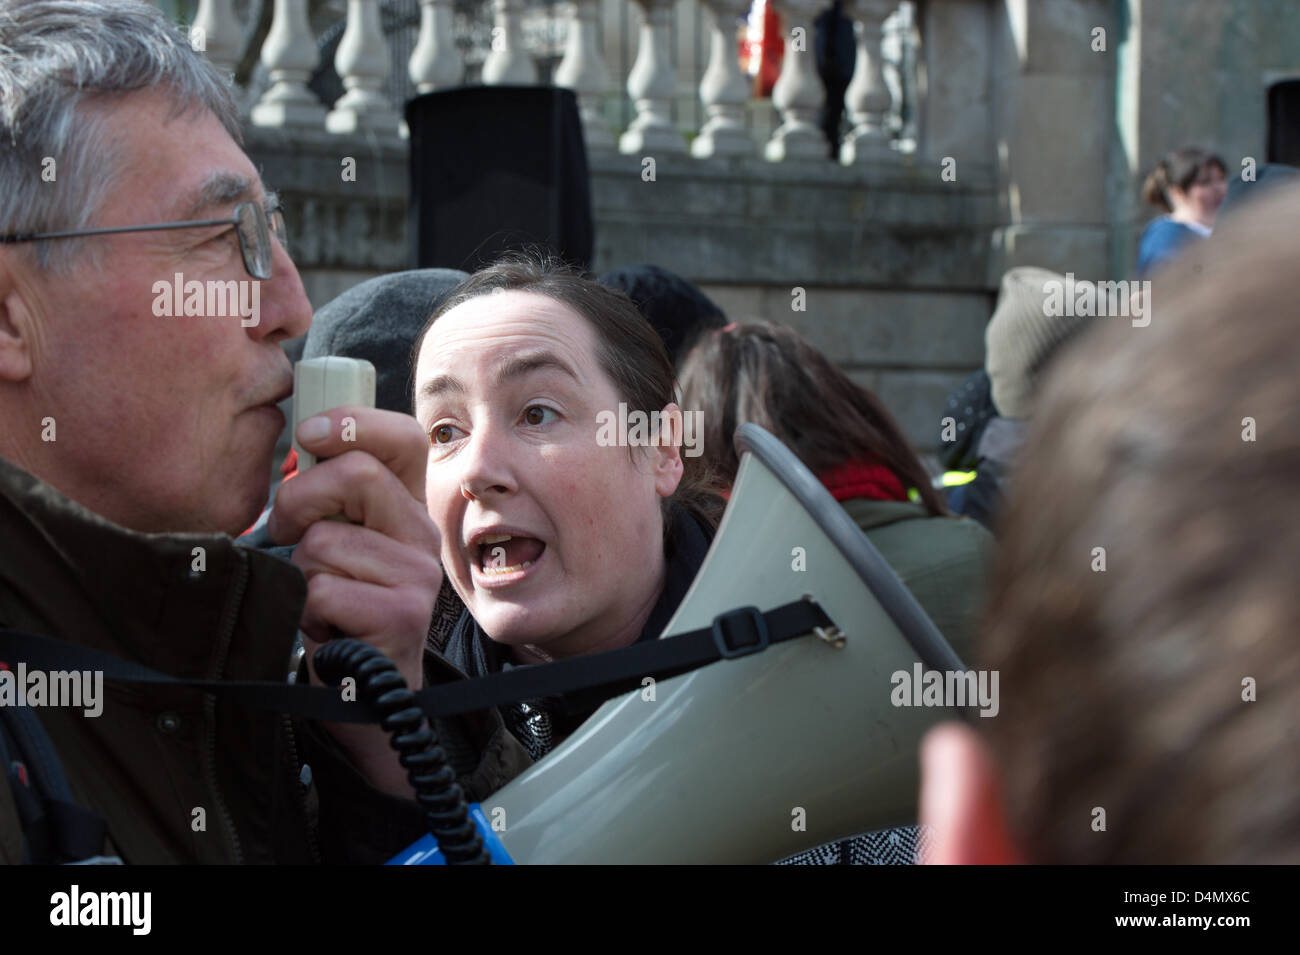 Liverpool, UK. Saturday 16th March 2013. Labour Party supporter tries to silence a dissenter in the crowd. As part of nationwide protests, campaigners gathered in Liverpool city centre to demonstrate against a new 'bedroom tax' that will cut benefits to people with a spare room. Credit: David Colbran/Alamy Live News Stock Photo